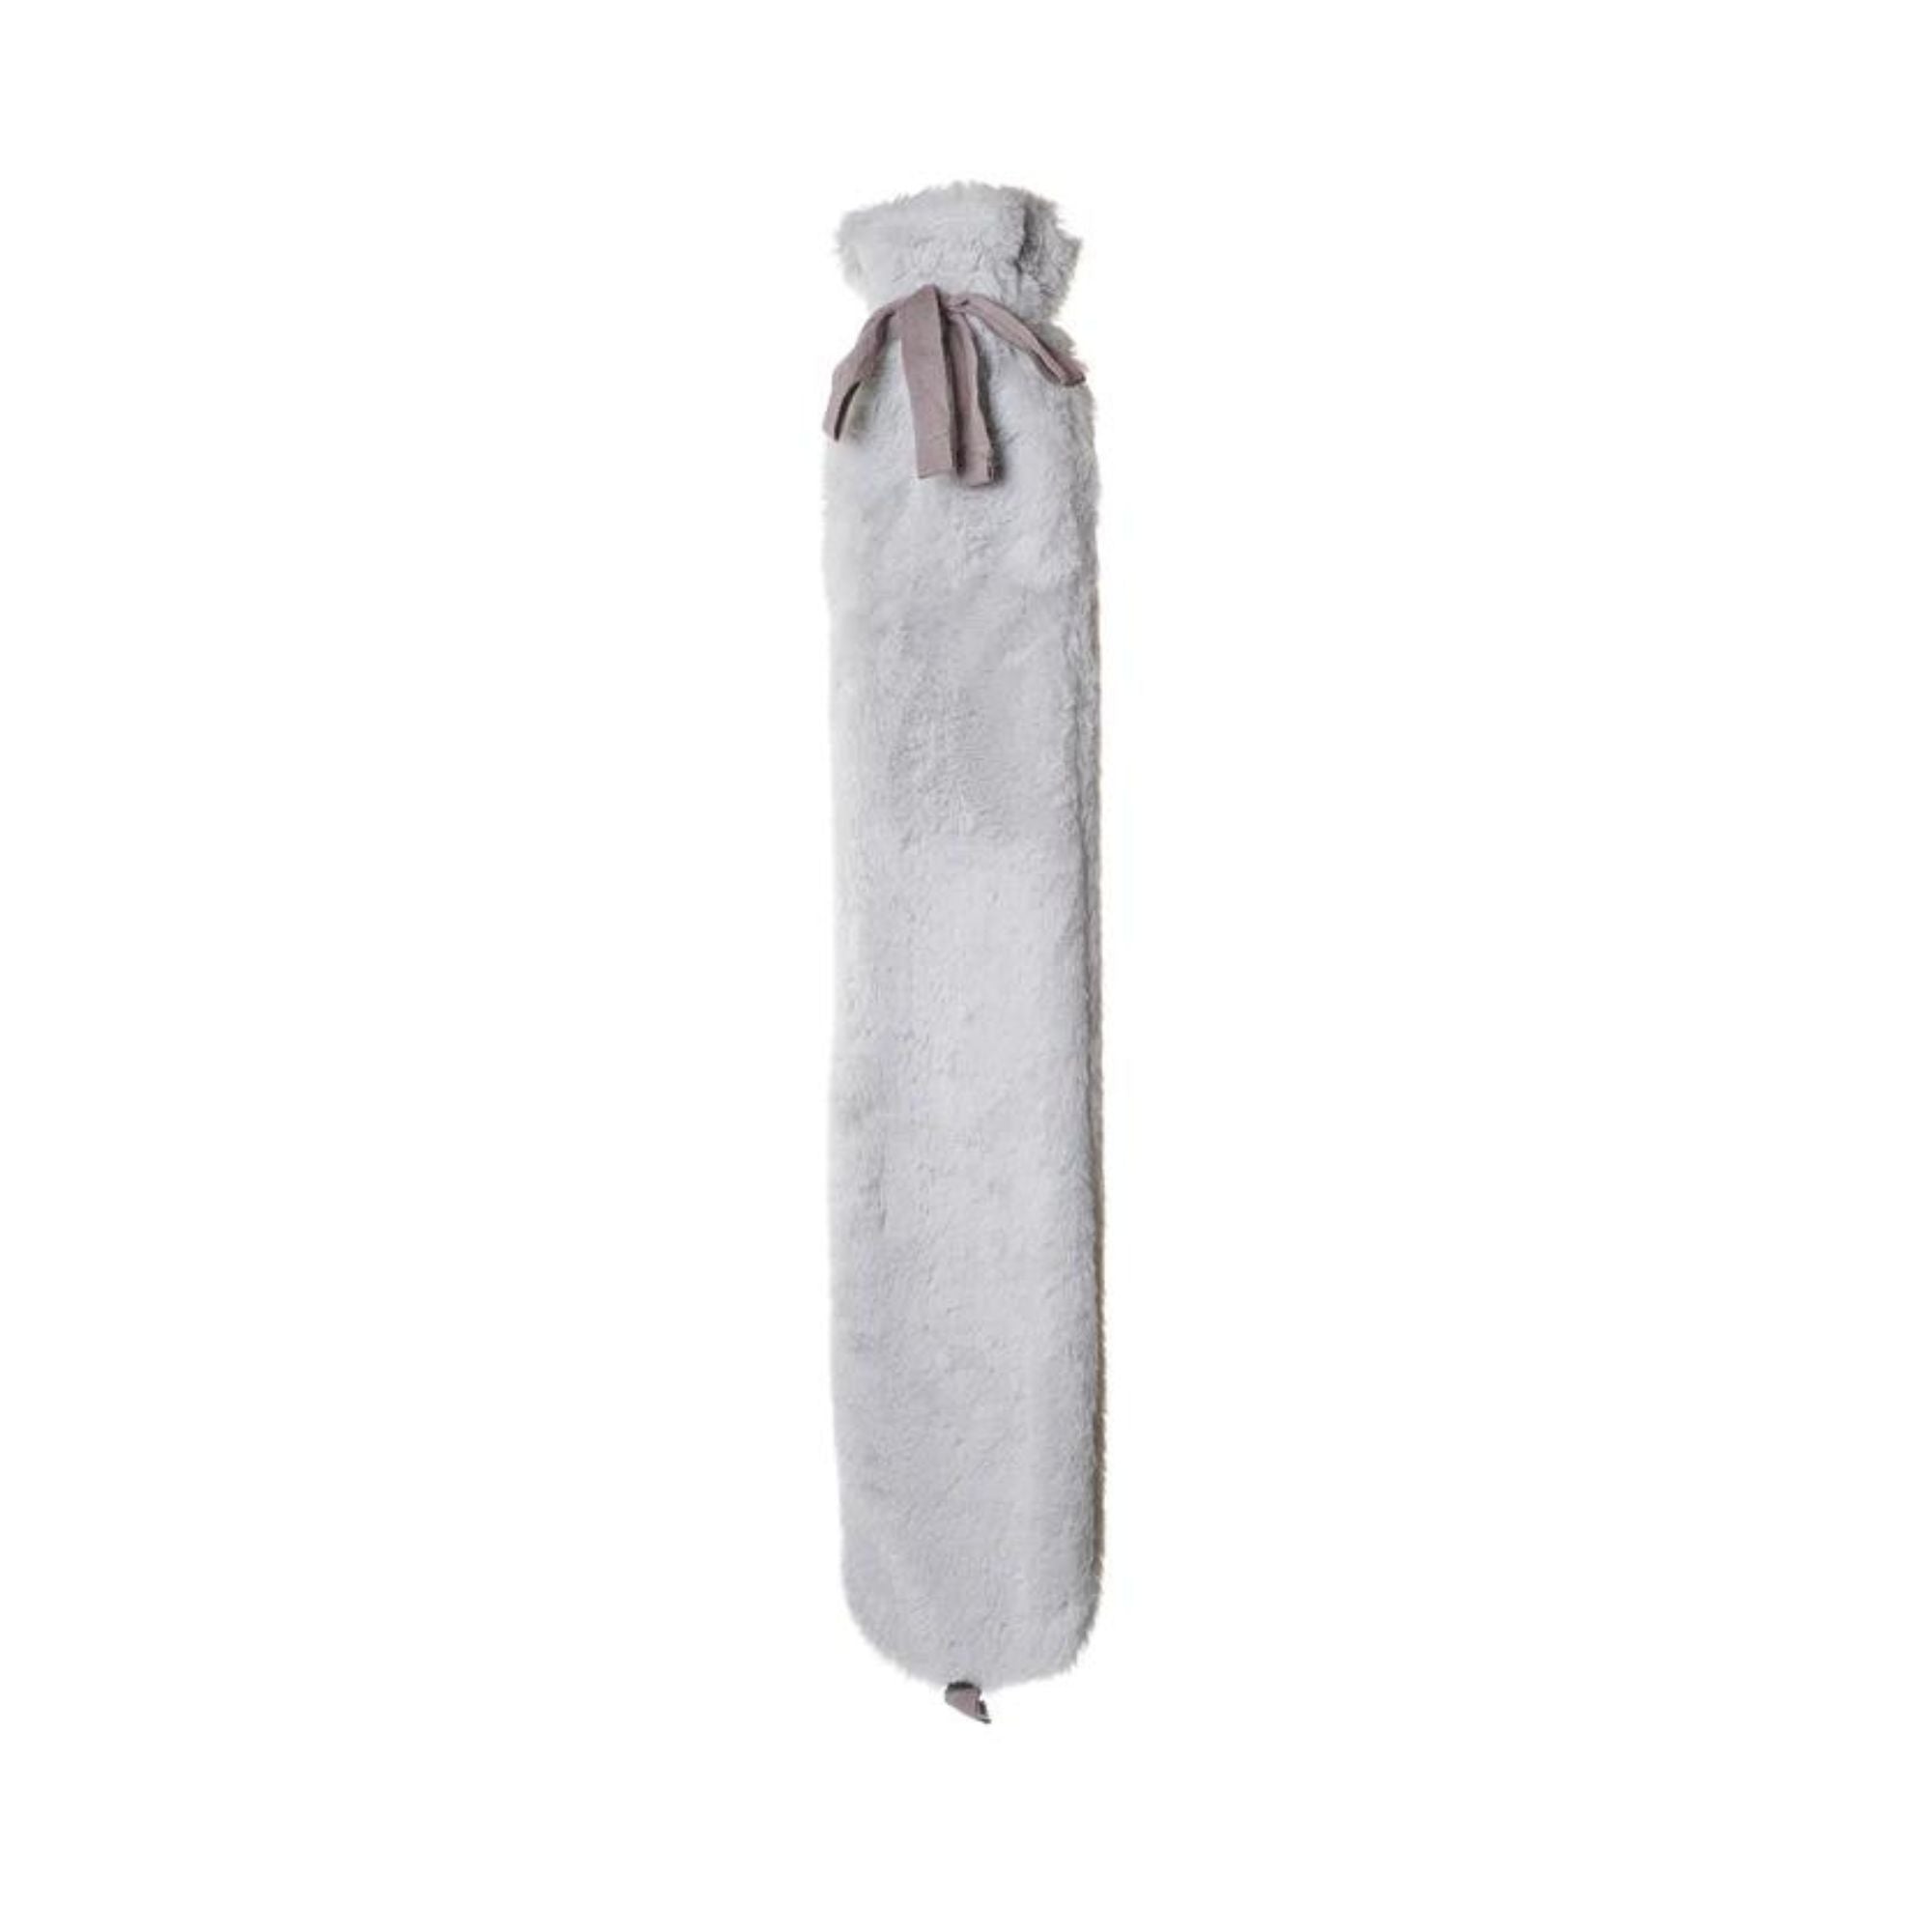 2 Litre Long Hot Water Bottle with Grey Faux Fur Cover and Ribbon Tie